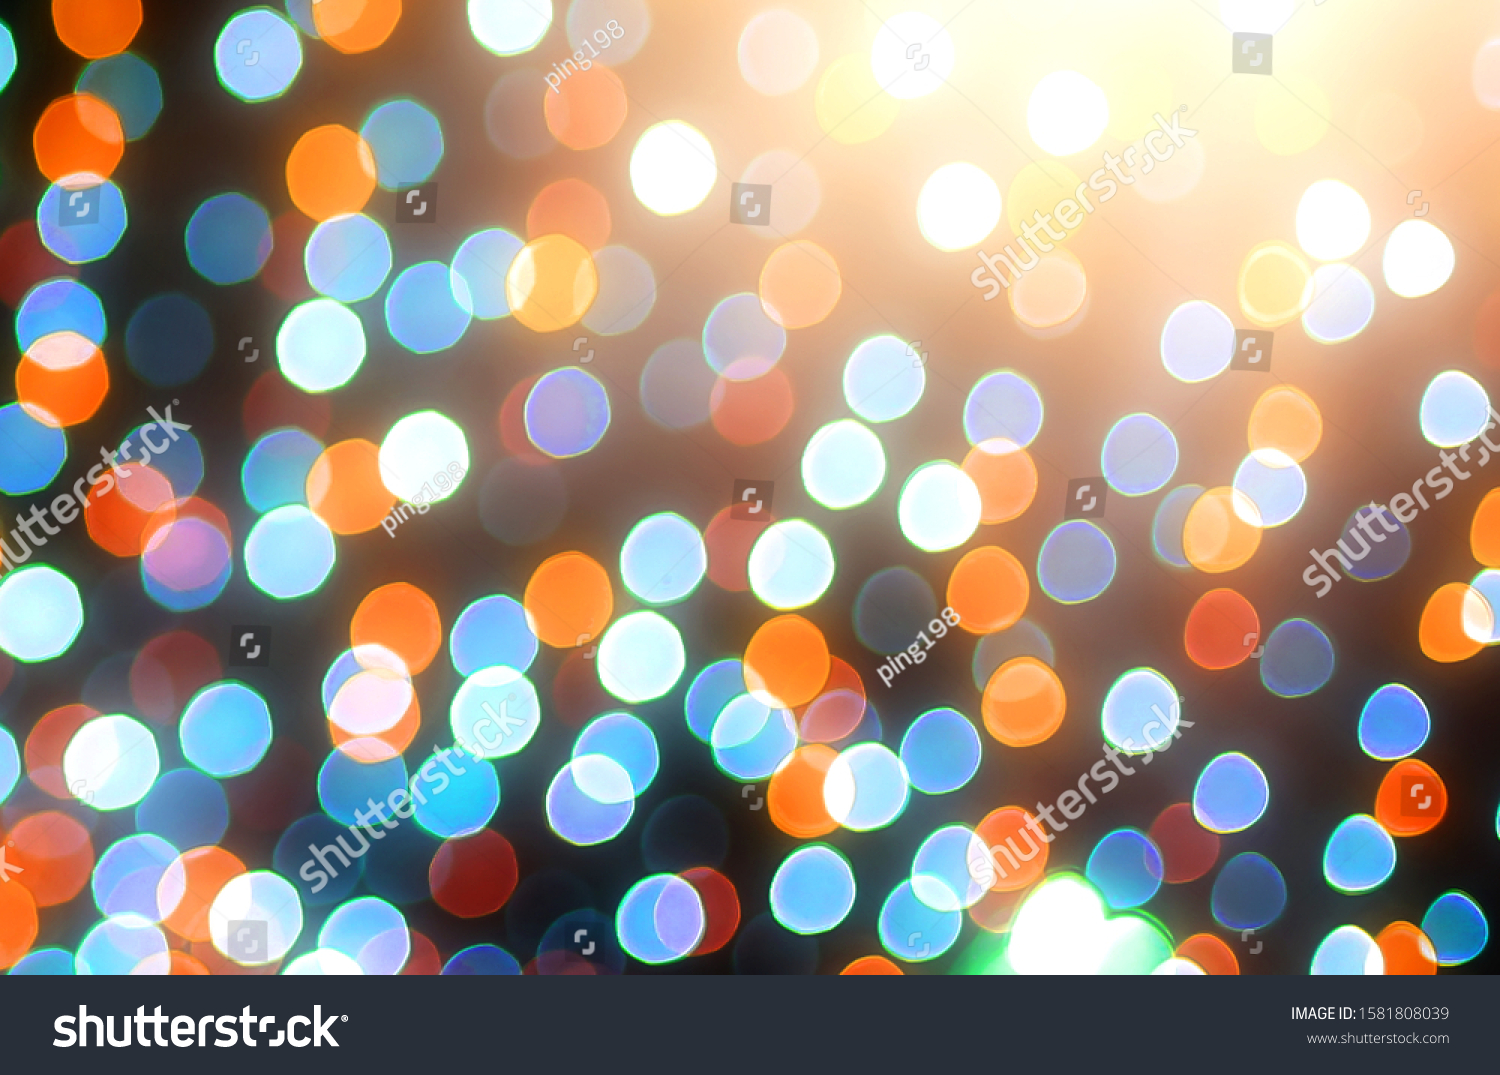 Blurred backdrop, blurred background, circle blur, bokeh blur from the light shining through as a backdrop and beautiful computer screen images. #1581808039